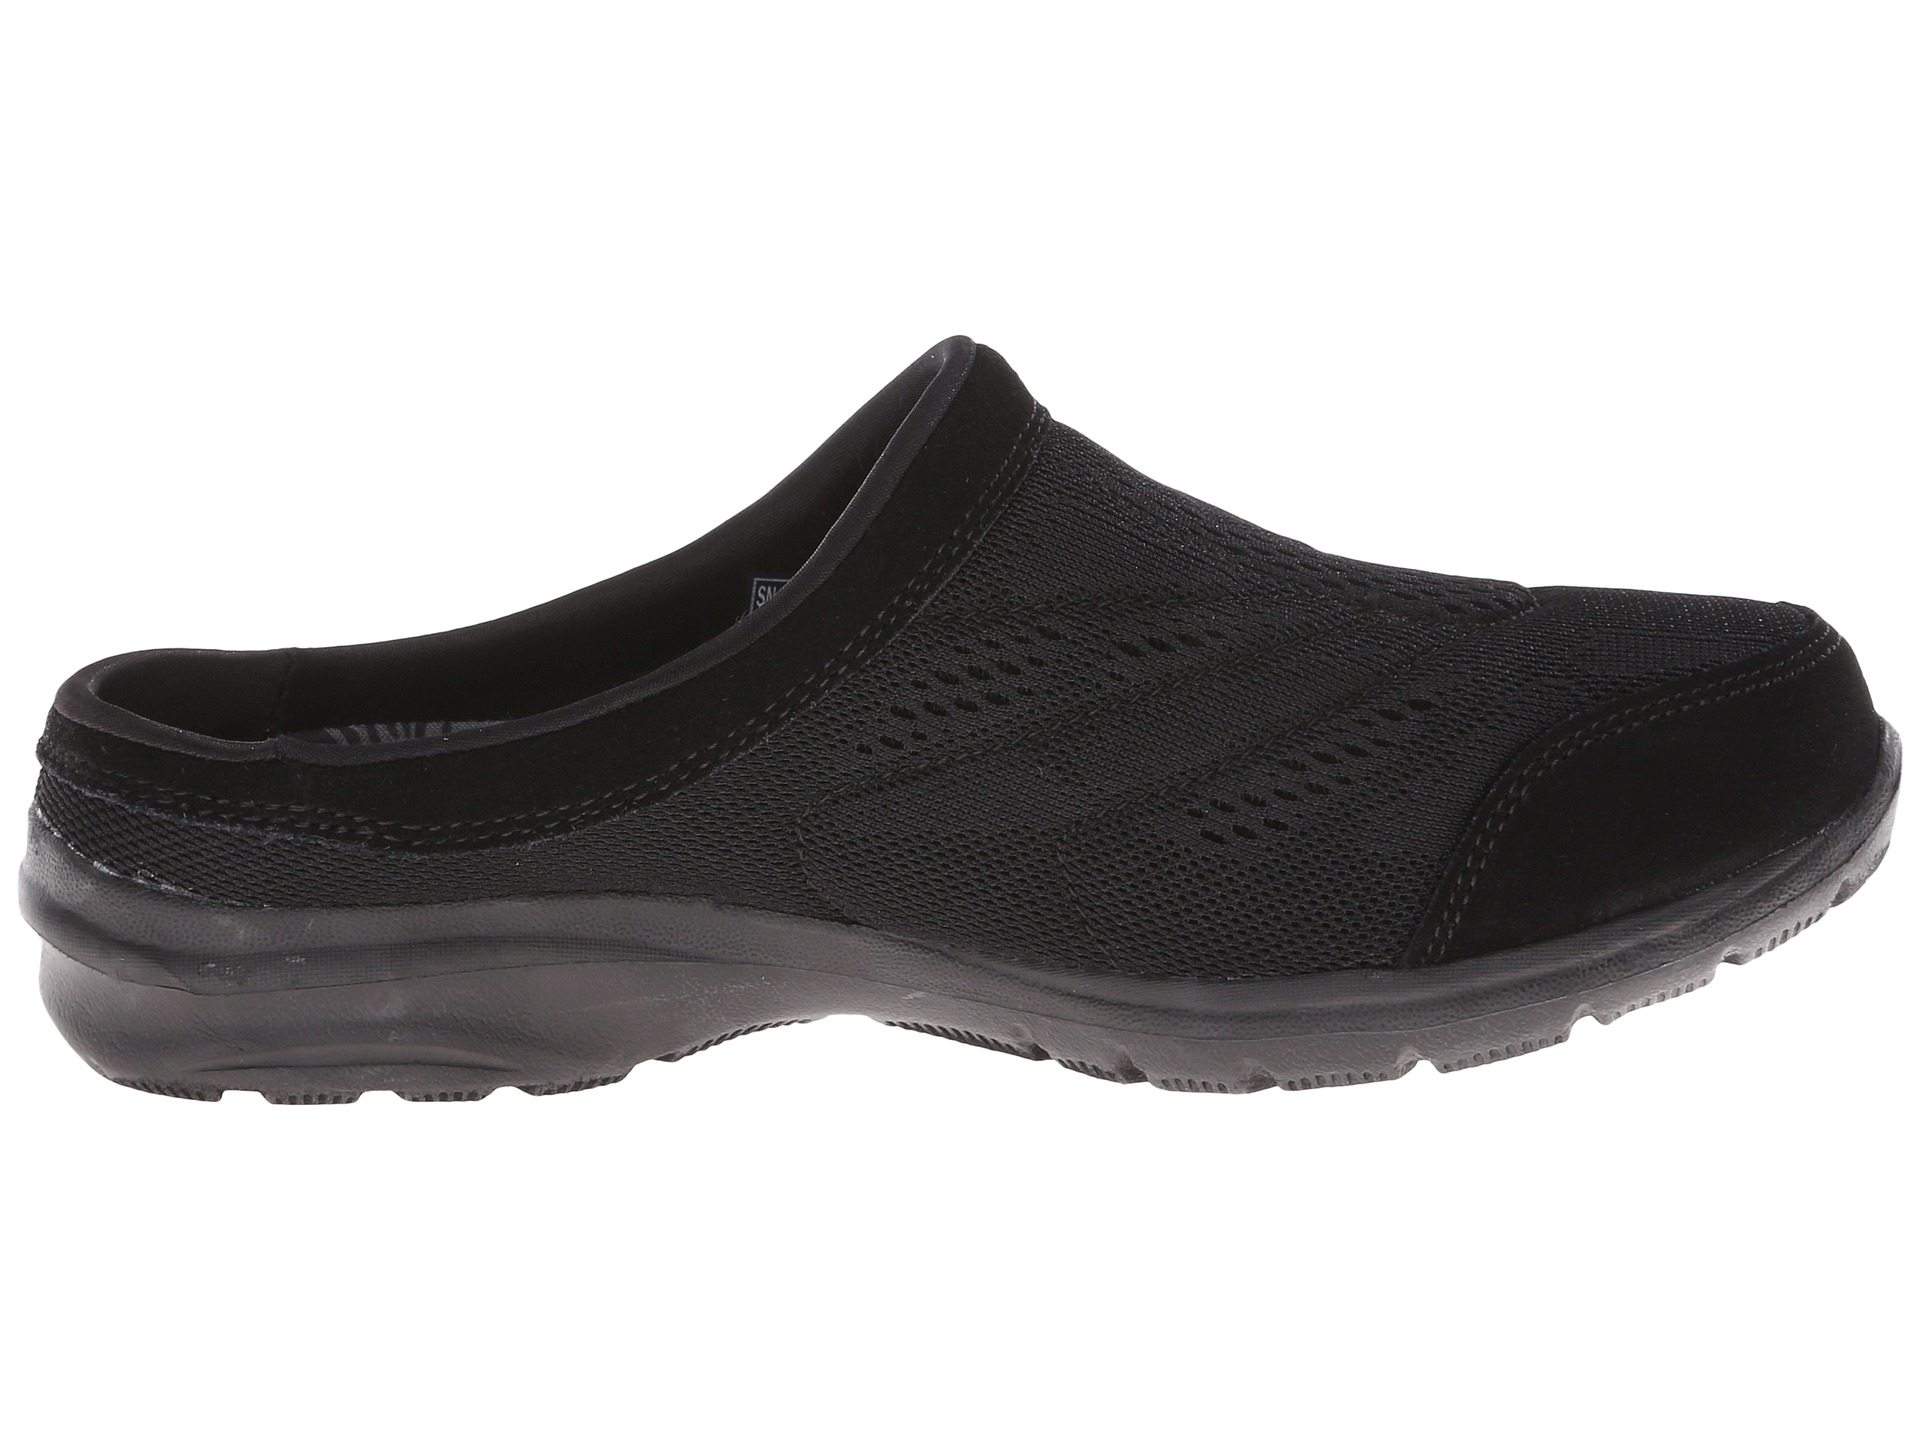 SKECHERS Relaxed Fit - Relaxed Living-Serenity Black - Zappos.com Free ...